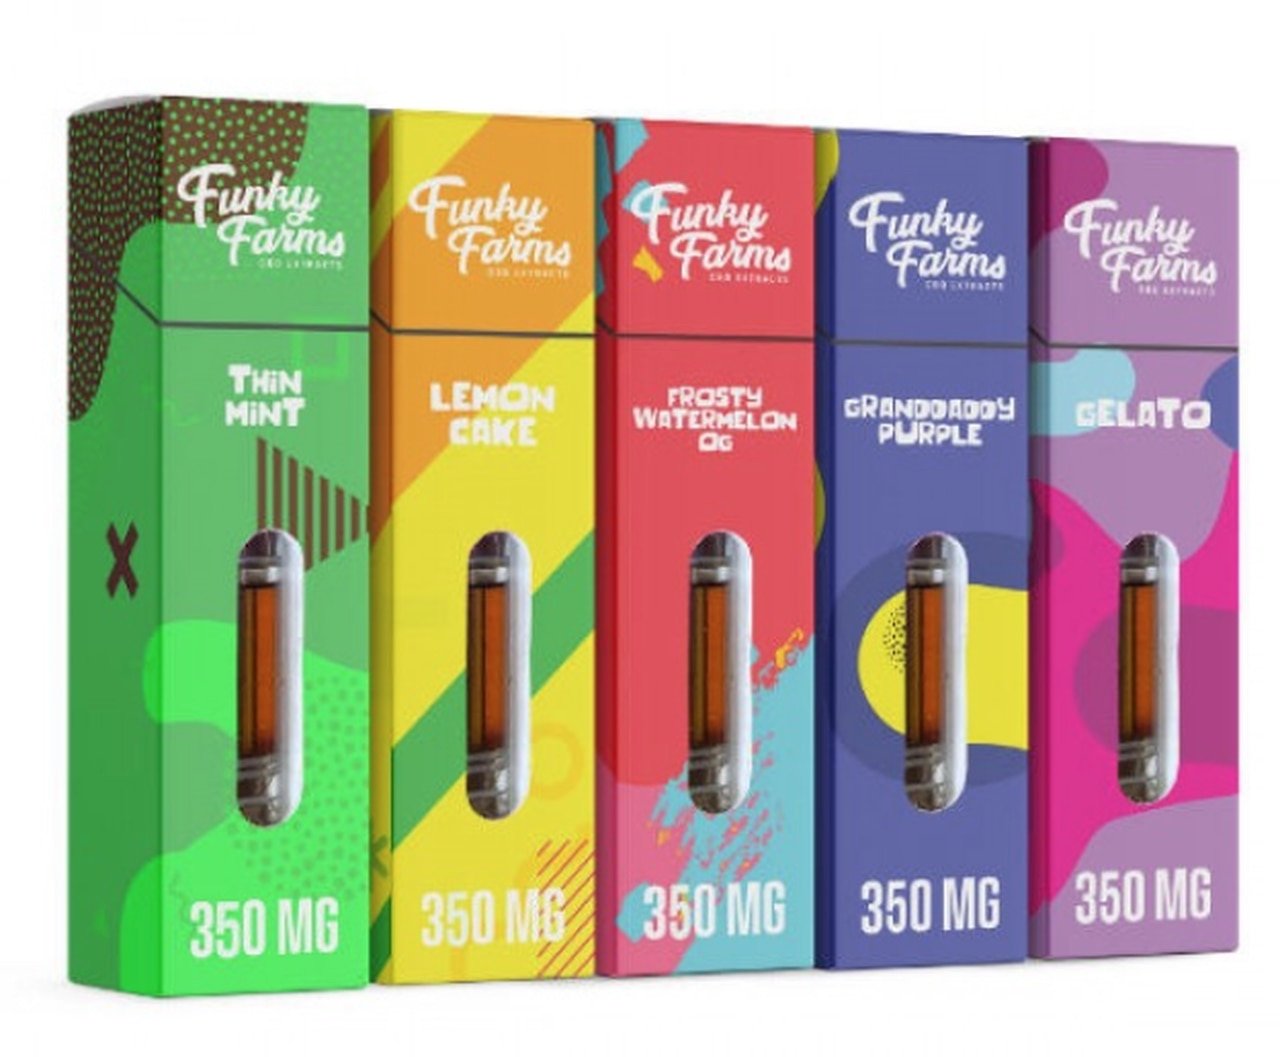 colorful box packaging, funky farms cbd